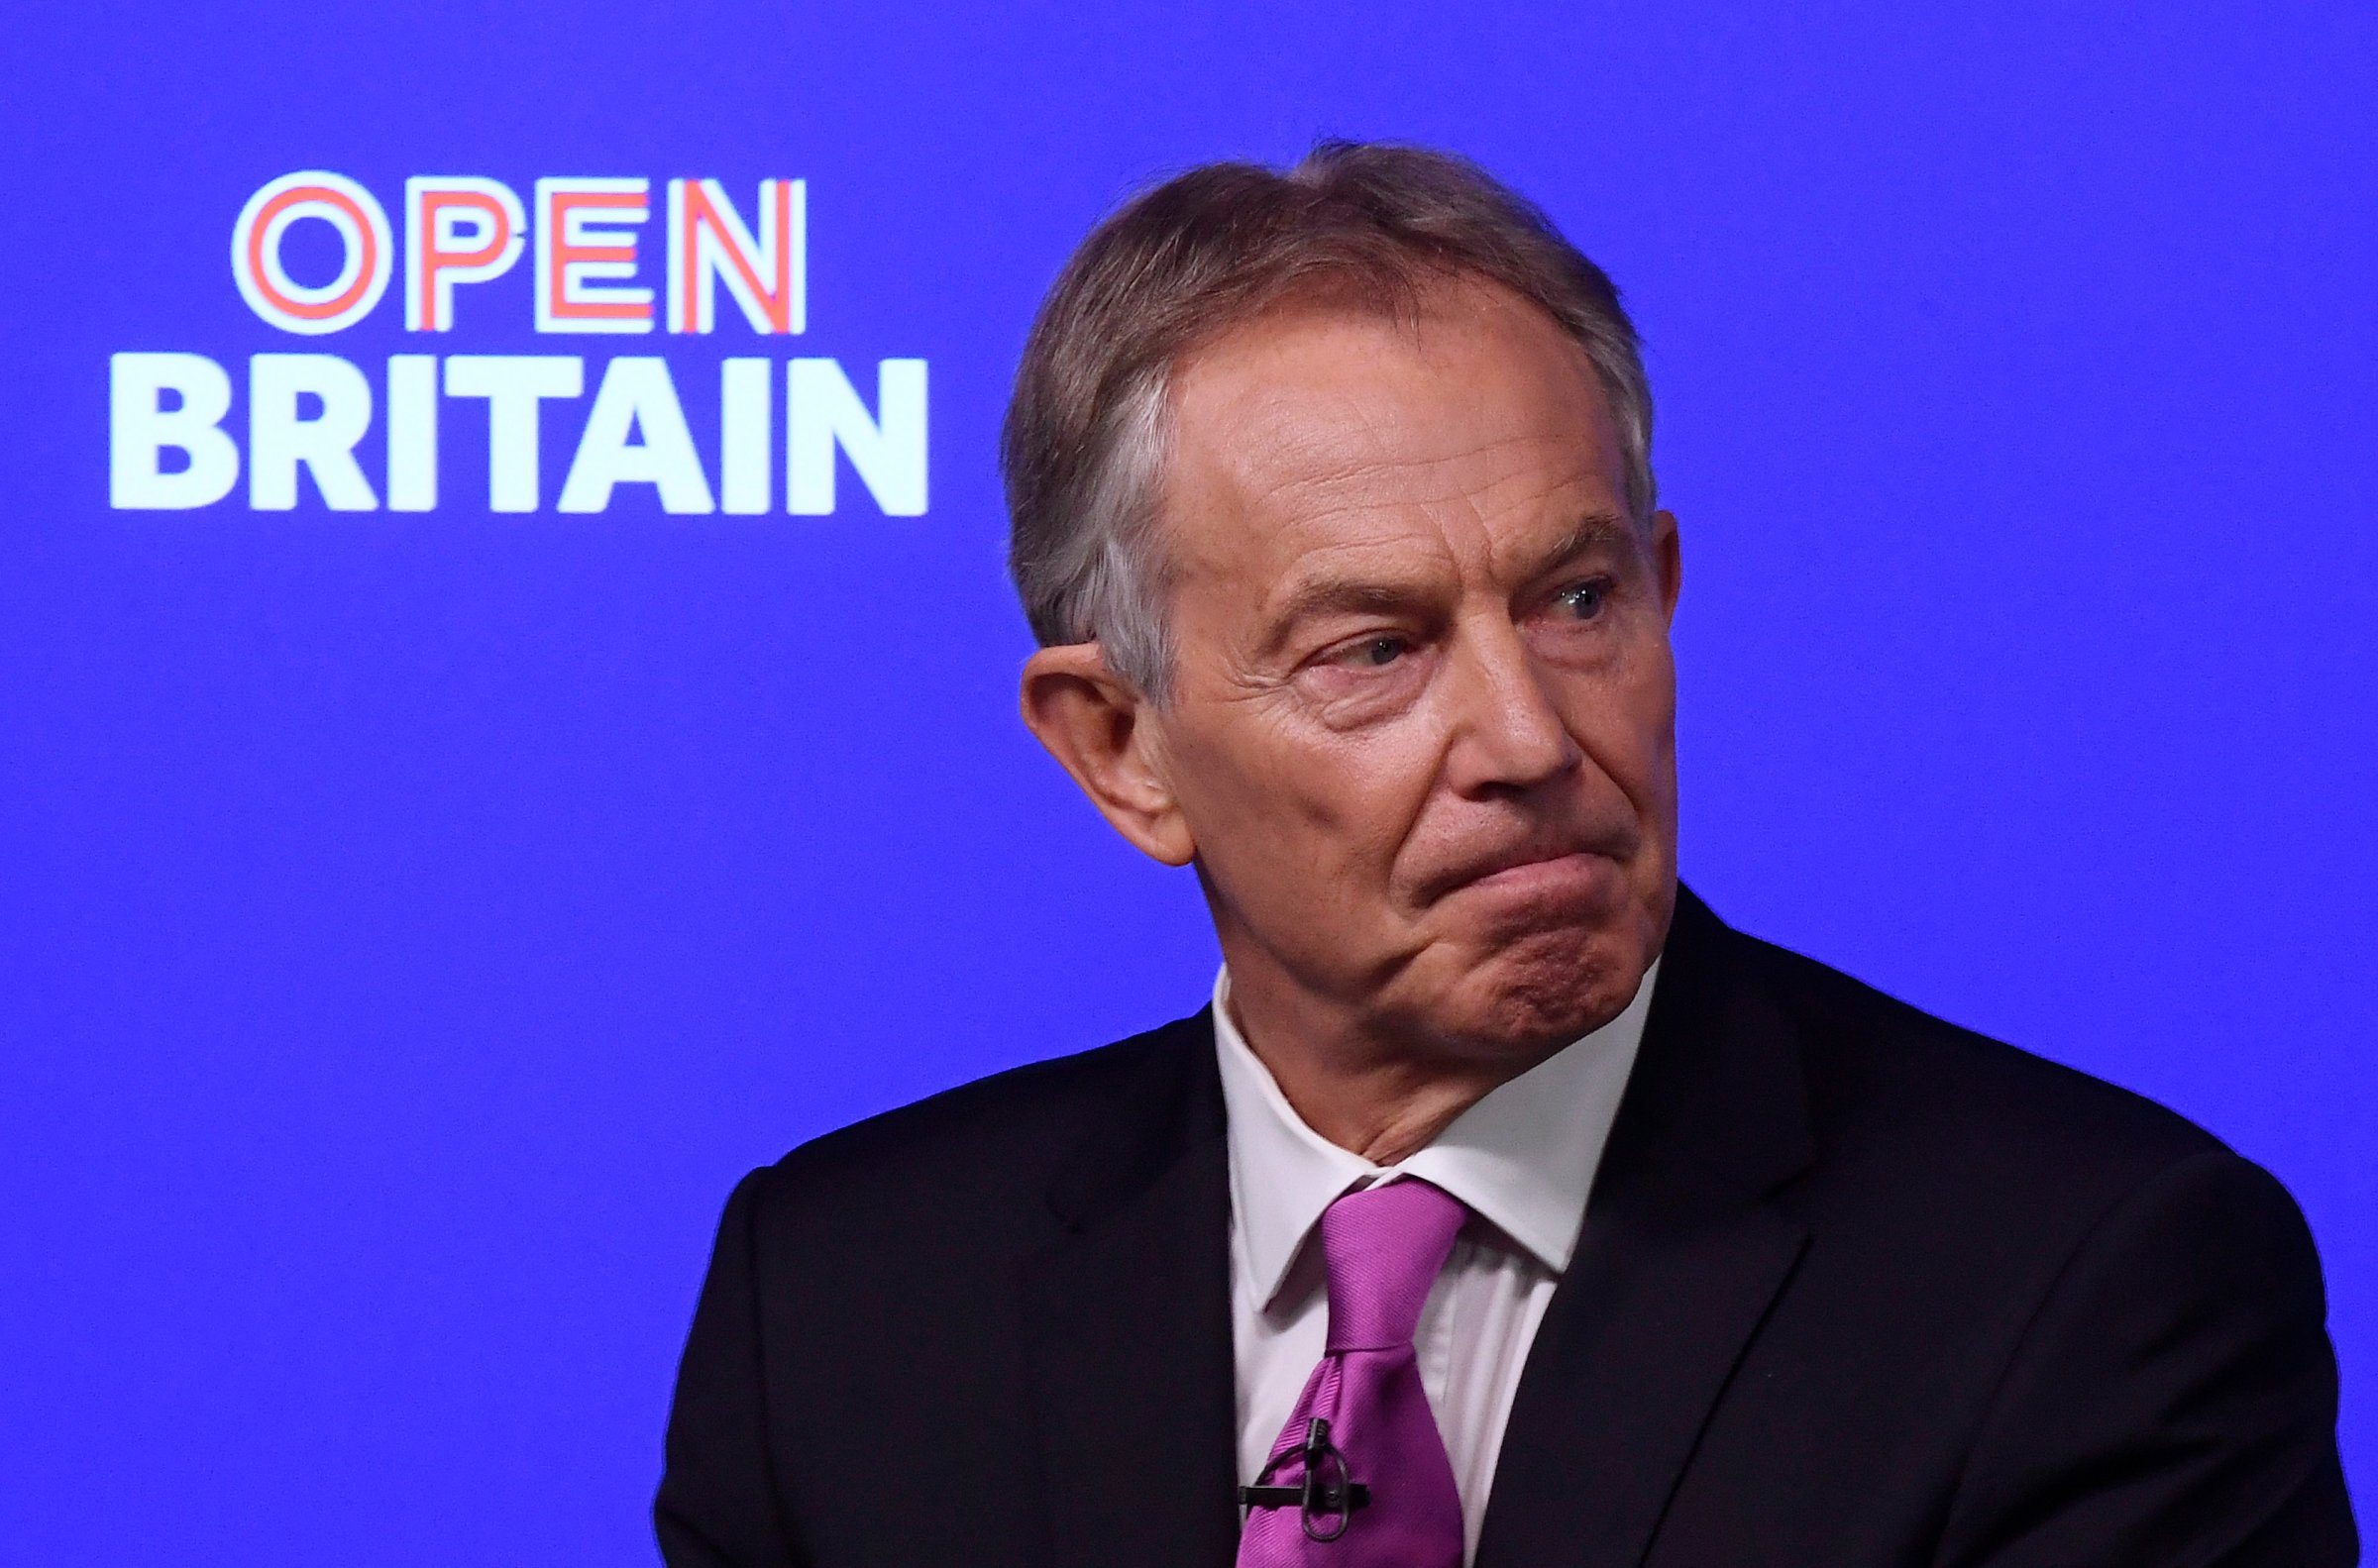 Former British Prime Minister Tony Blair delivers a keynote speech at a pro-Europe event in London